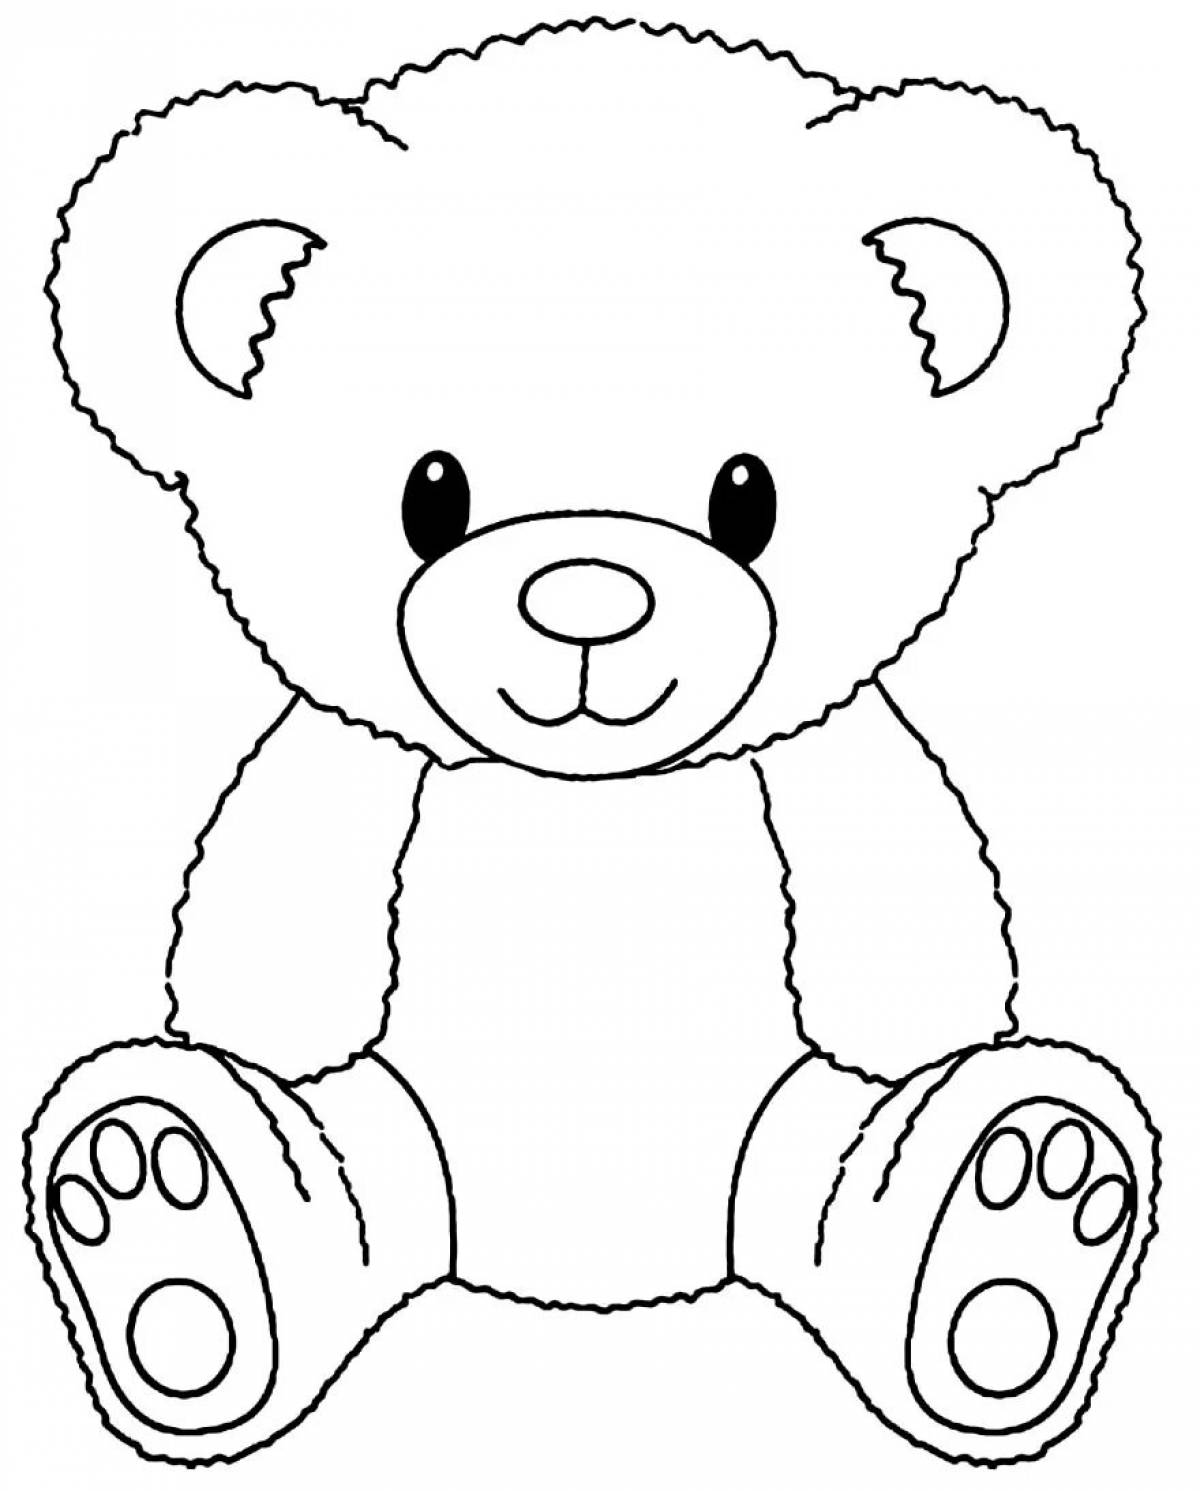 Caring teddy bear coloring page